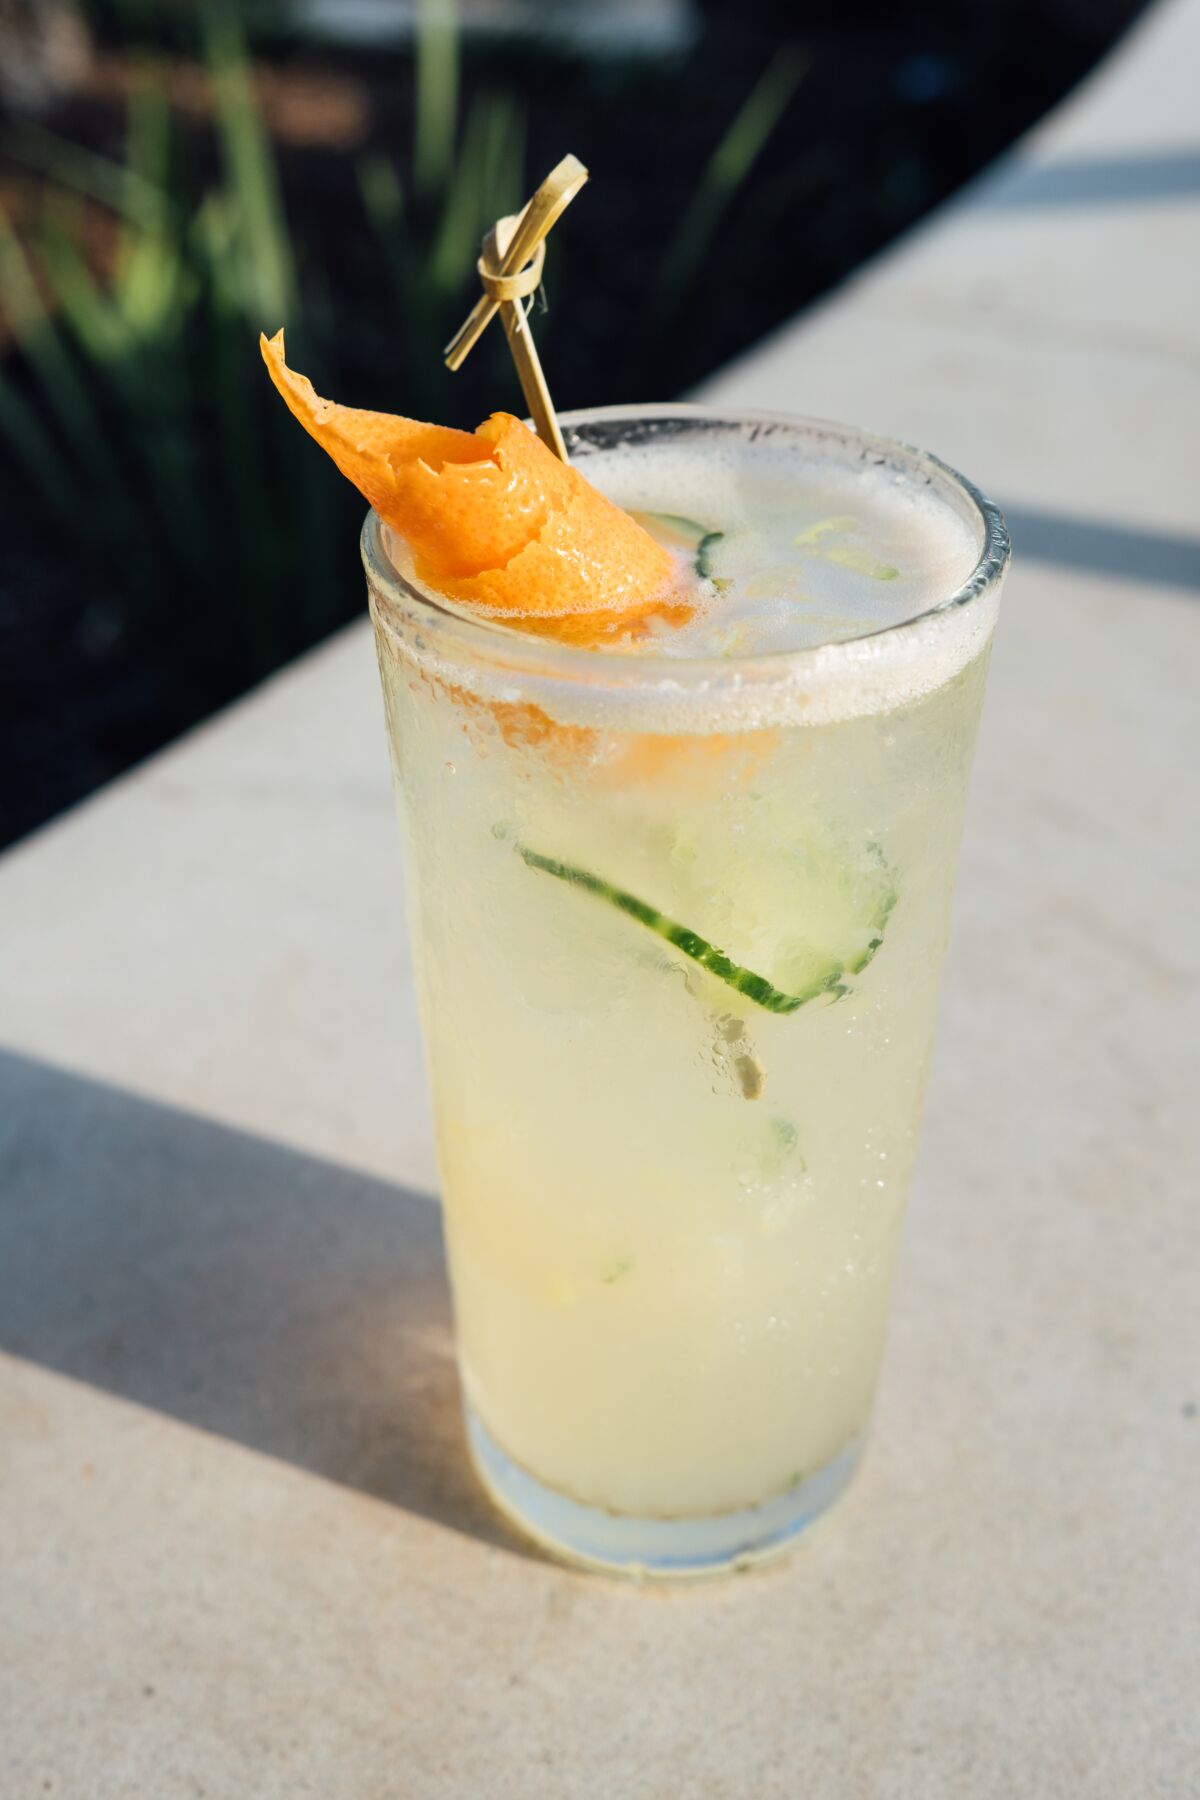 The 72 Degrees, a new locally-inspired  cocktail being served this summer at North Italia locations in San Diego and Del Mar.